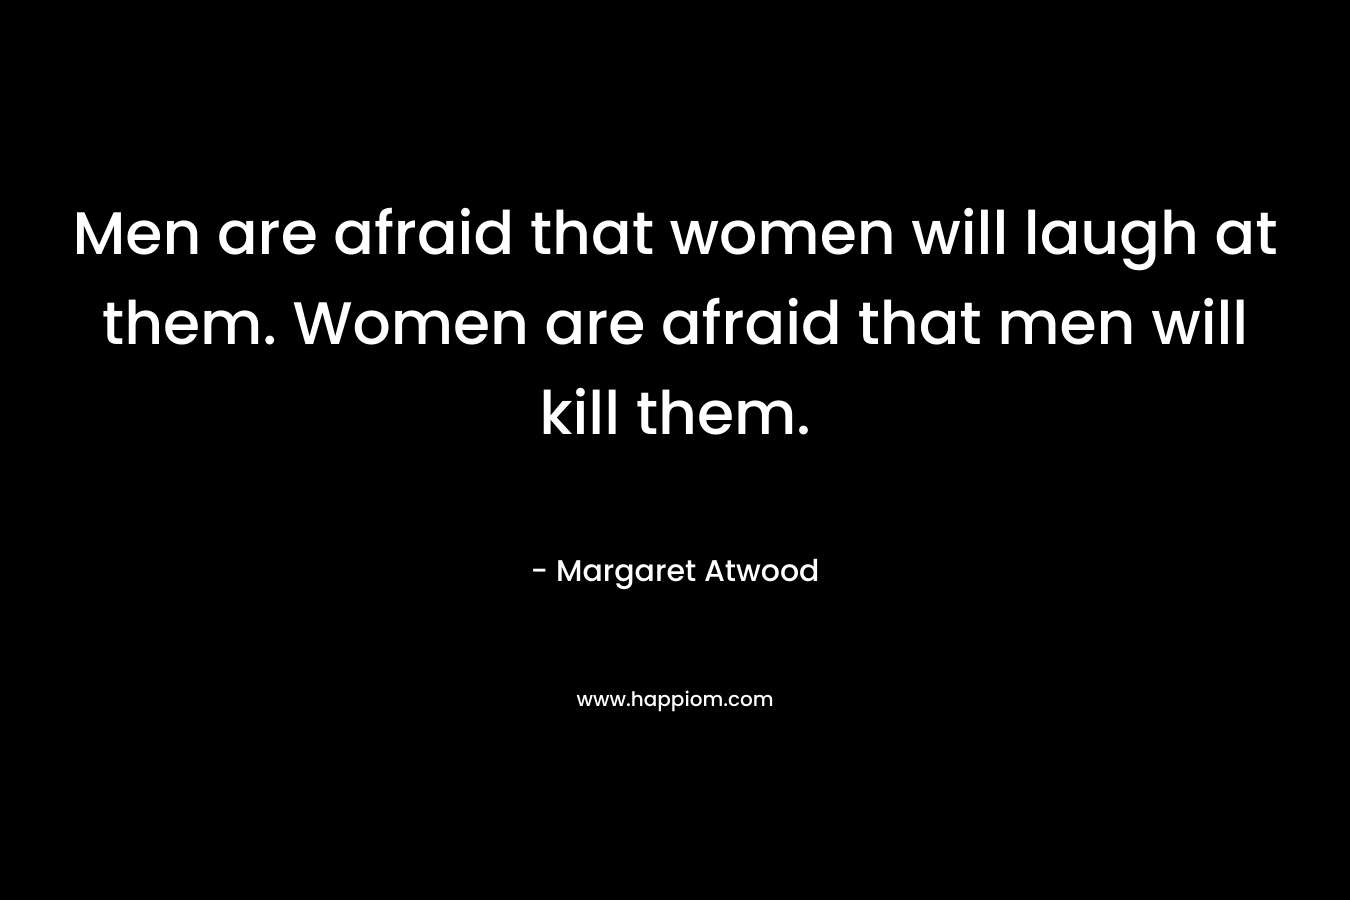 Men are afraid that women will laugh at them. Women are afraid that men will kill them.